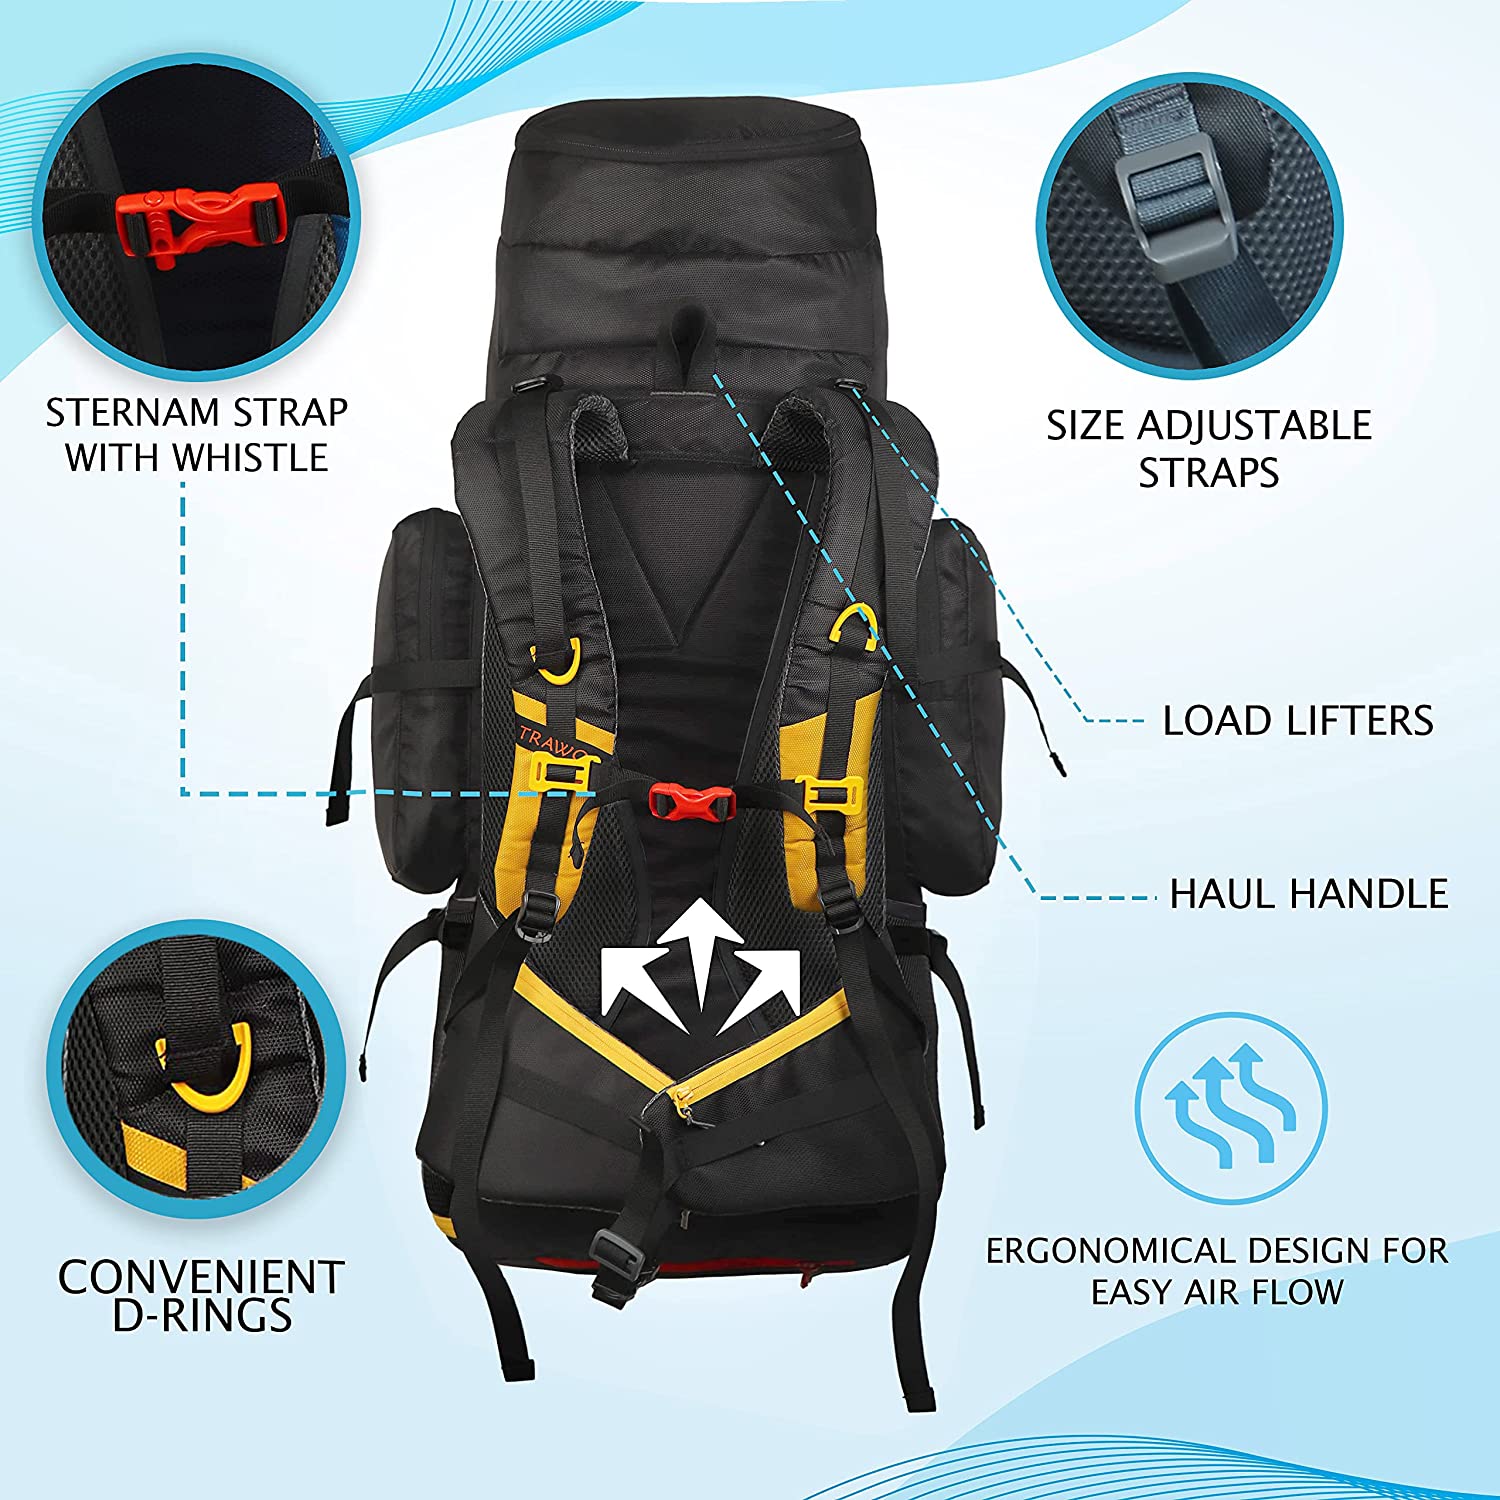 Buy TRAWOC 80L Travel Backpack Camping Hiking Rucksack Trekking Bag with  Water Proof Rain Cover/Shoe Compartment- BHK001 Black X Large at